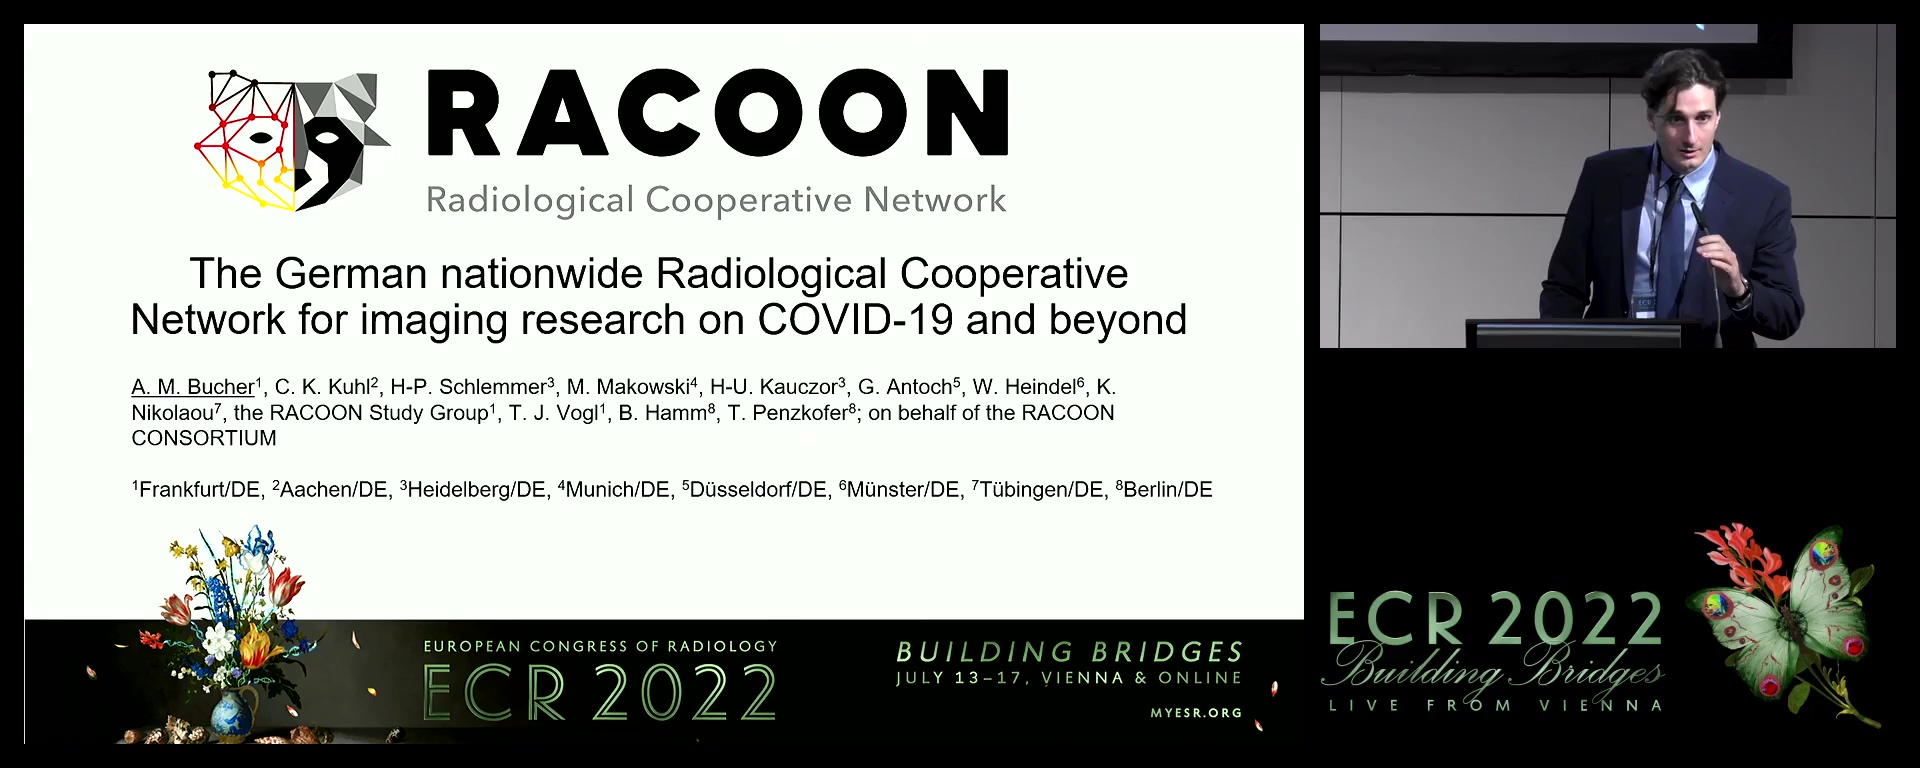 RACOON: The German nationwide Radiological Cooperative Network for imaging research on COVID-19 and beyond